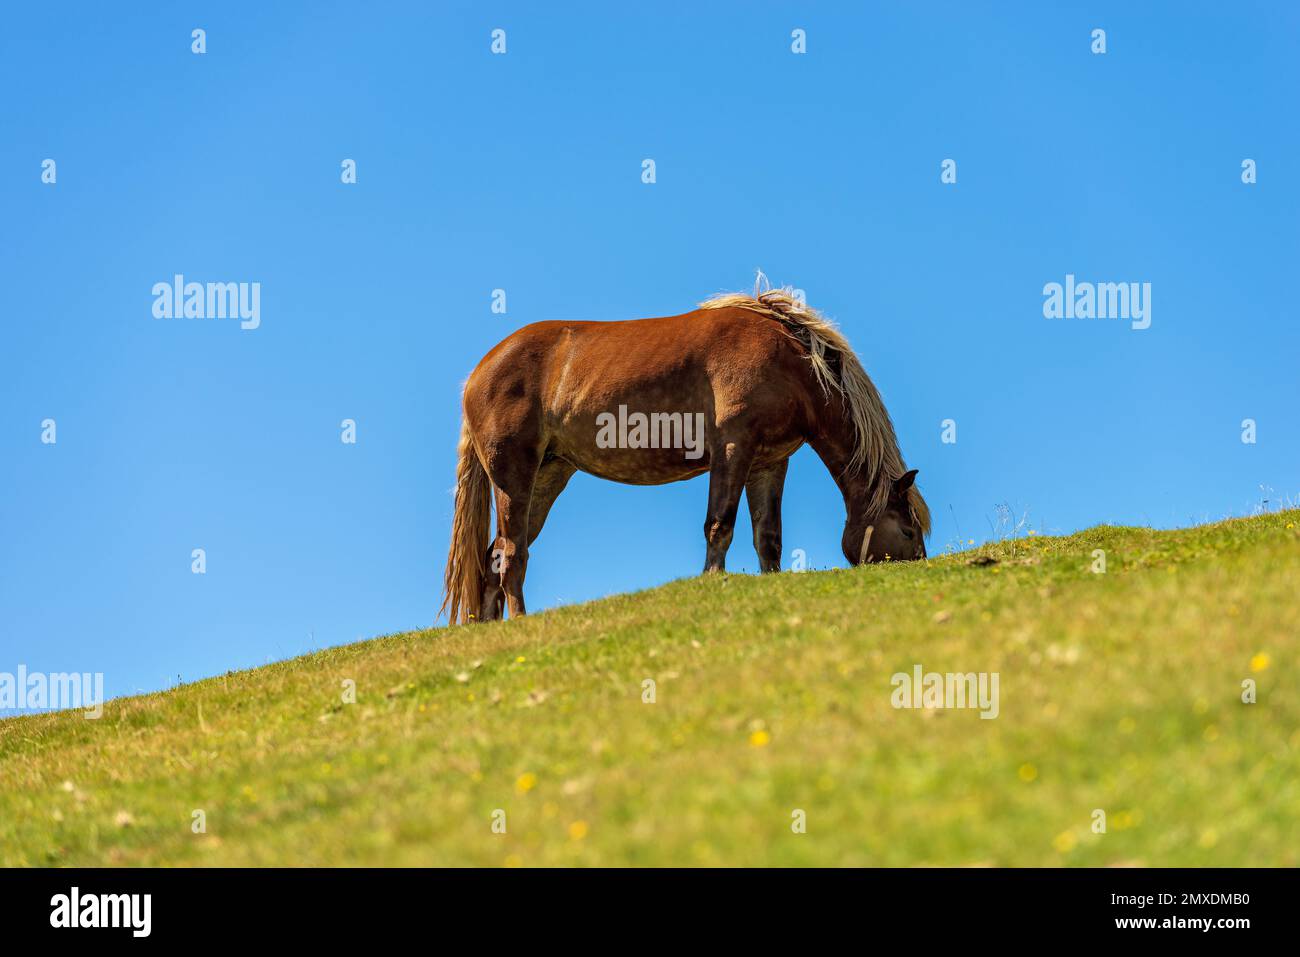 Brown horse in a mountain pasture against a clear blue sky, green meadow. Feistritz an der Gail municipality, Carinthia, Carnic Alps, Italy-Austria. Stock Photo